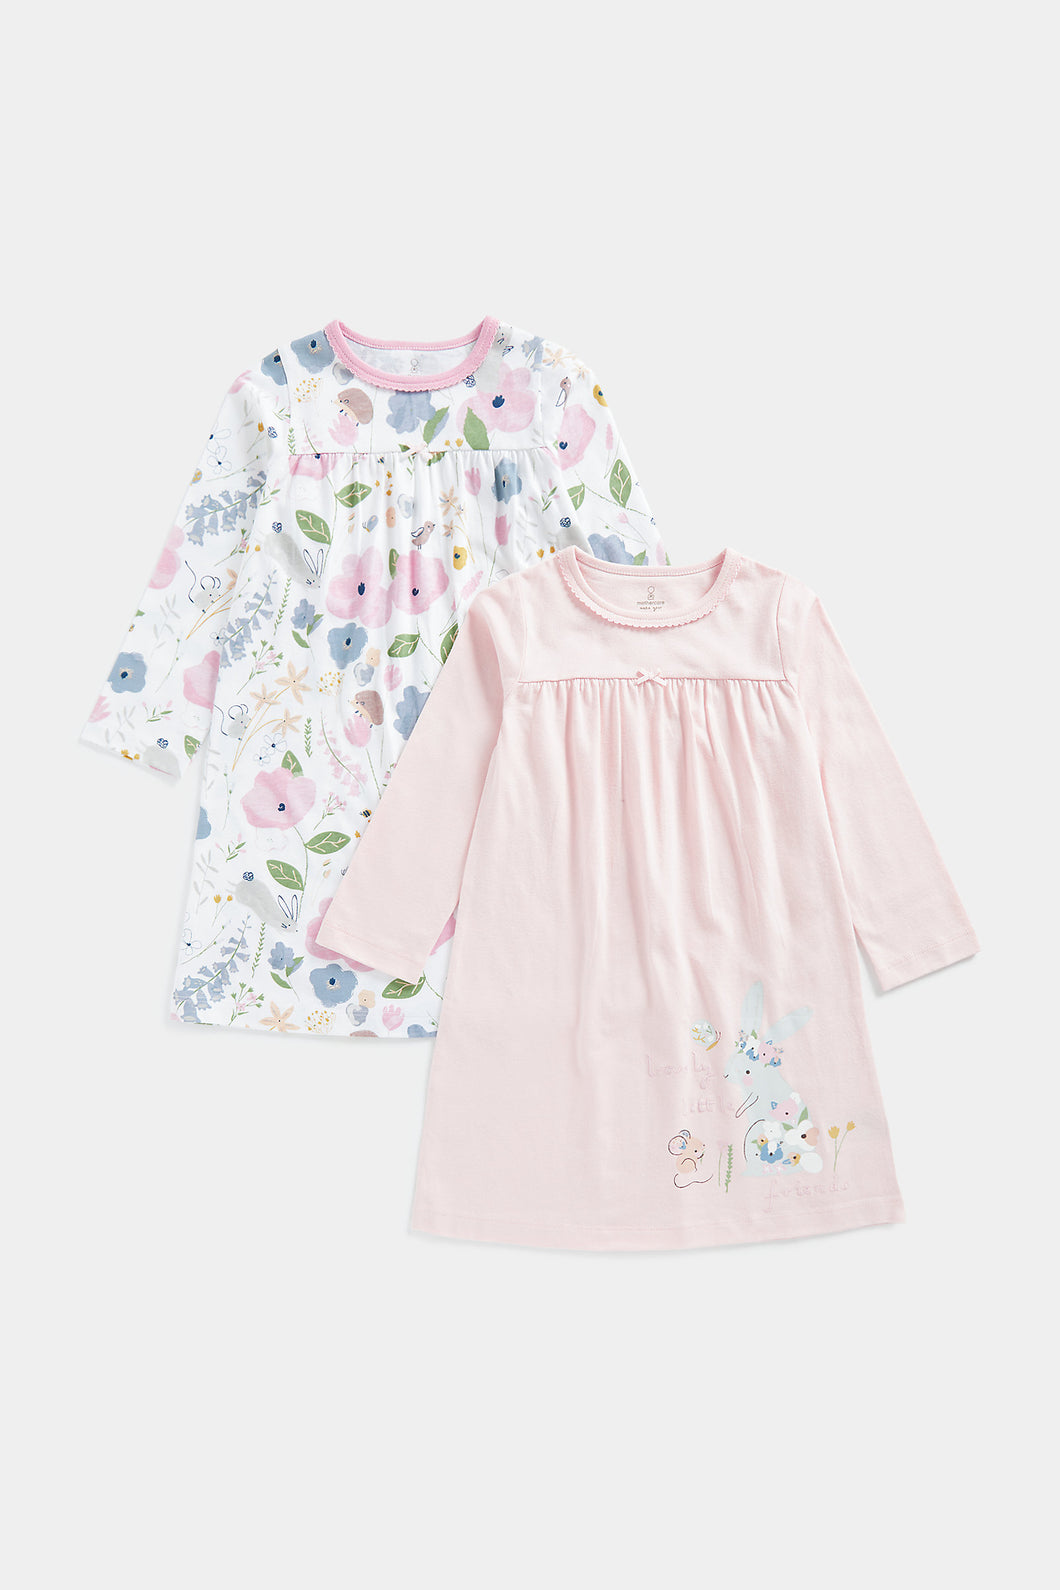 Mothercare Bunny Nightdresses - 2 Pack